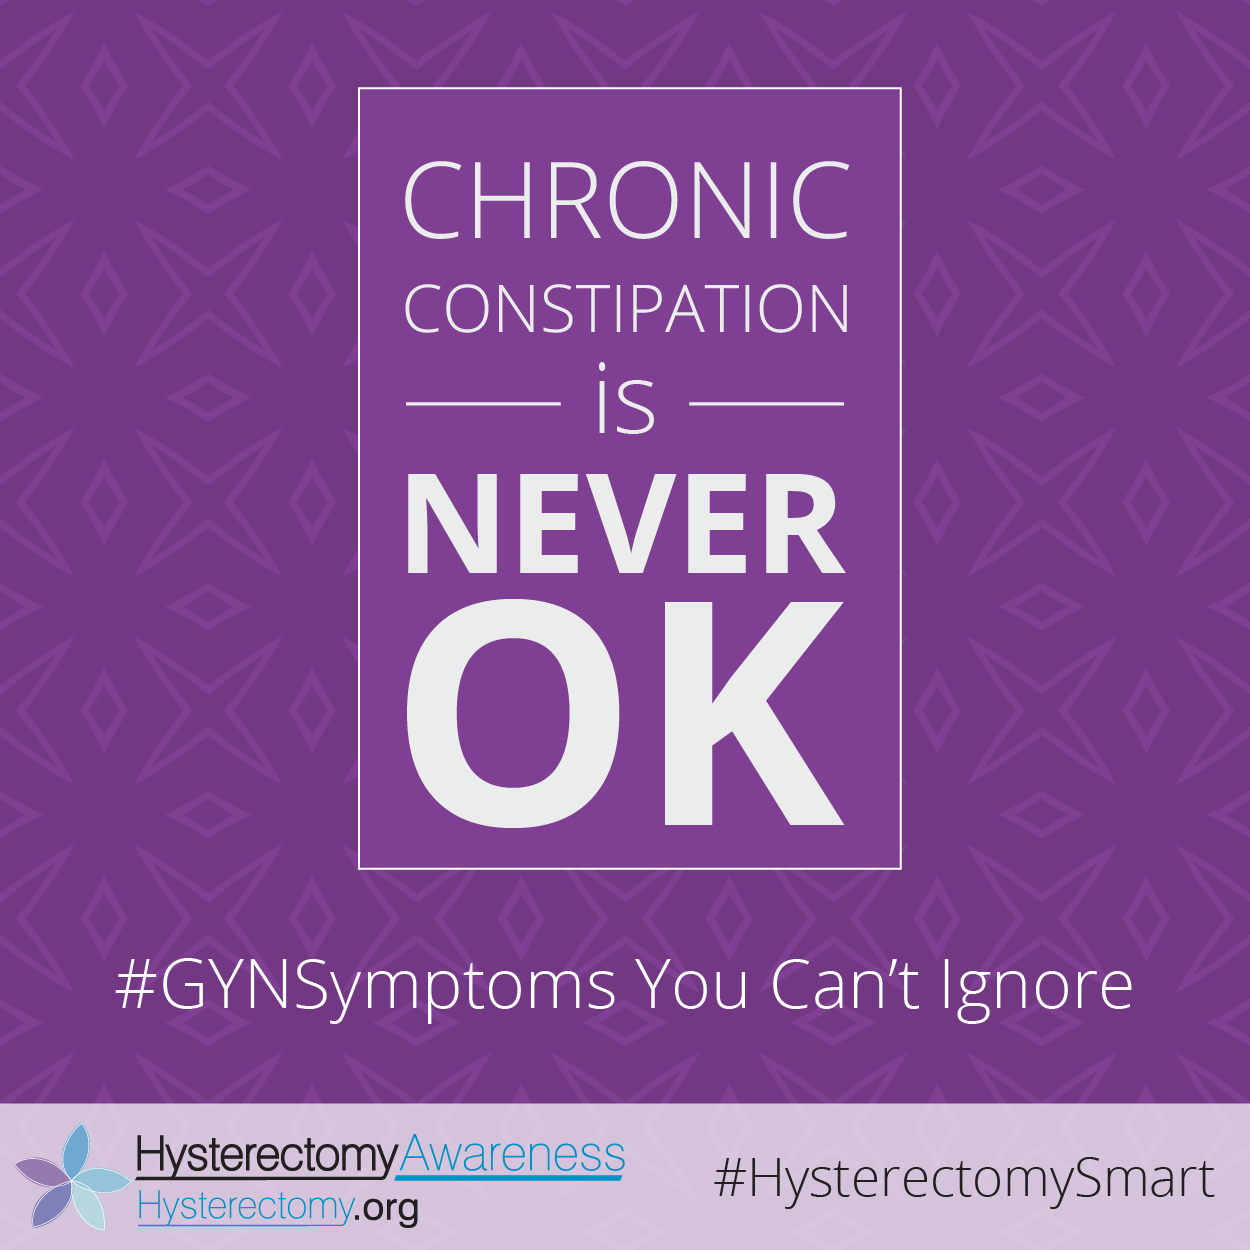 Chronic Constipation is NEVER OK #GYNSymptoms You Can’t Ignore #HysterectomySmart